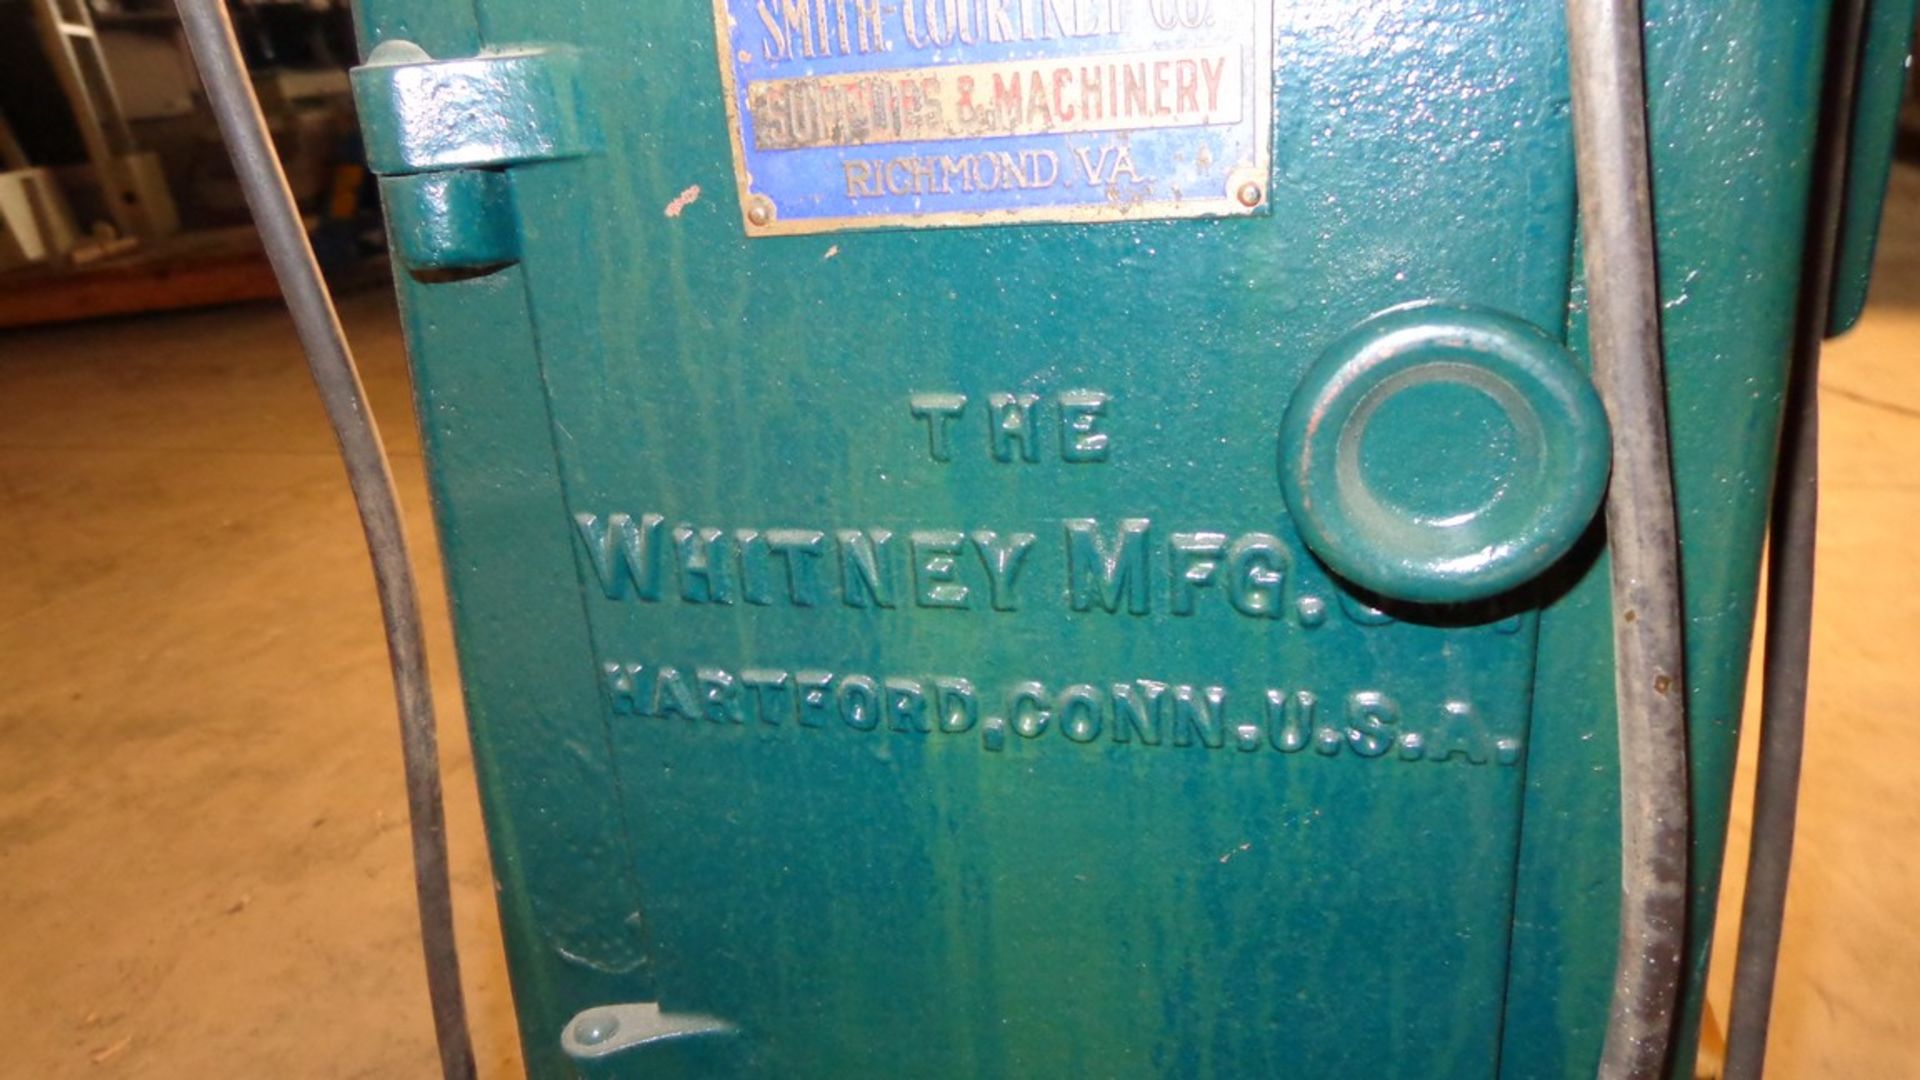 Whitney Antique Mill - Image 5 of 10